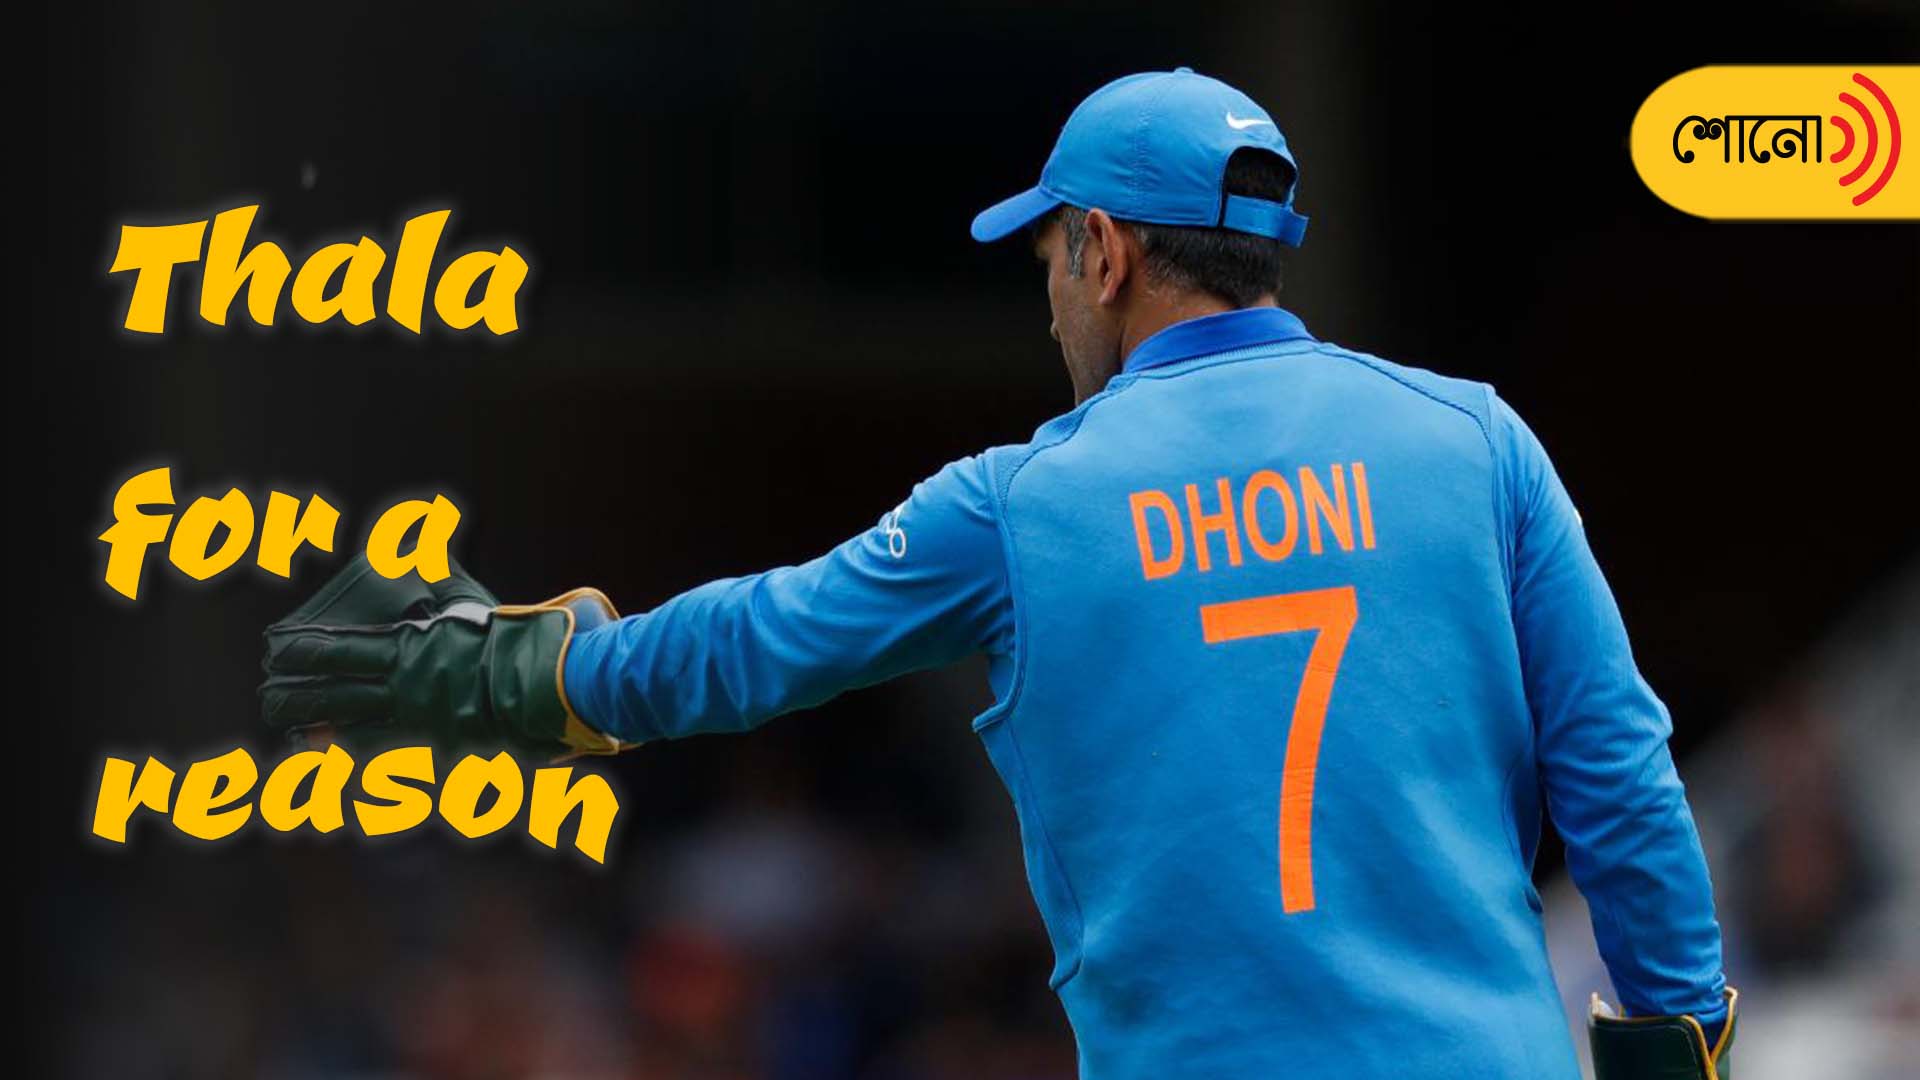 Google's 'Thala for a reason' post is an epic tribute to MS Dhoni